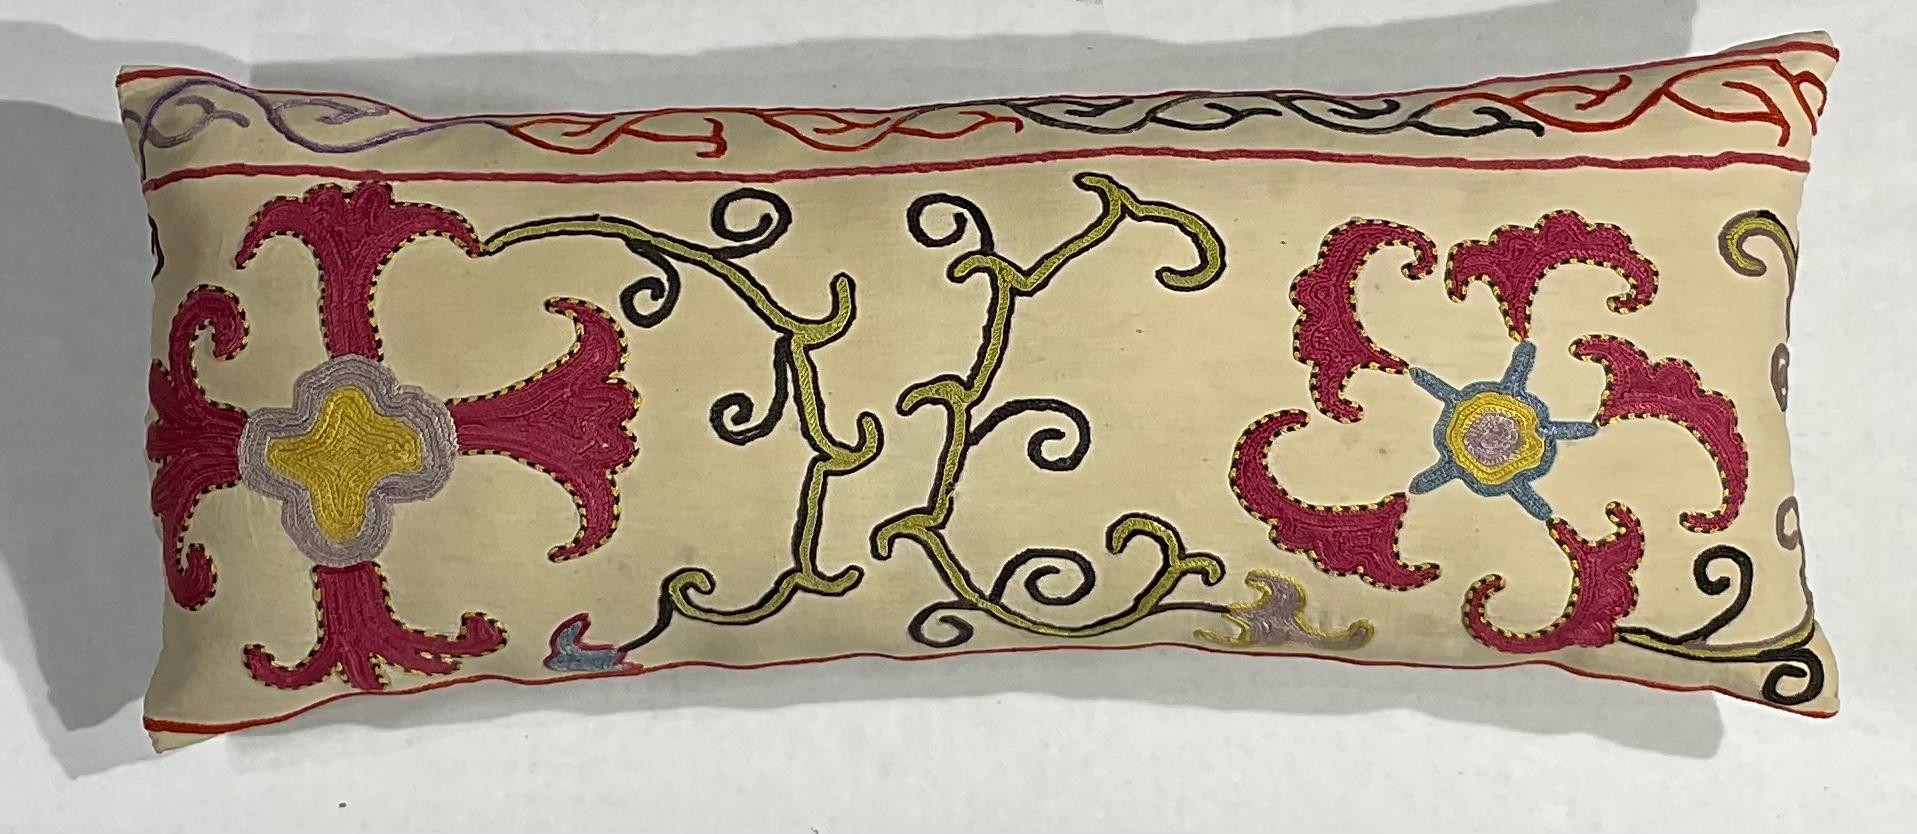 Single pillow made of antique hand silk embroidery Suzani textile, beautiful vine and flowers motifs. Fresh quality insert, fine cotton backing. Some missing embroidery due to age and oxidisation, some fading spots, or discolouration, the textile